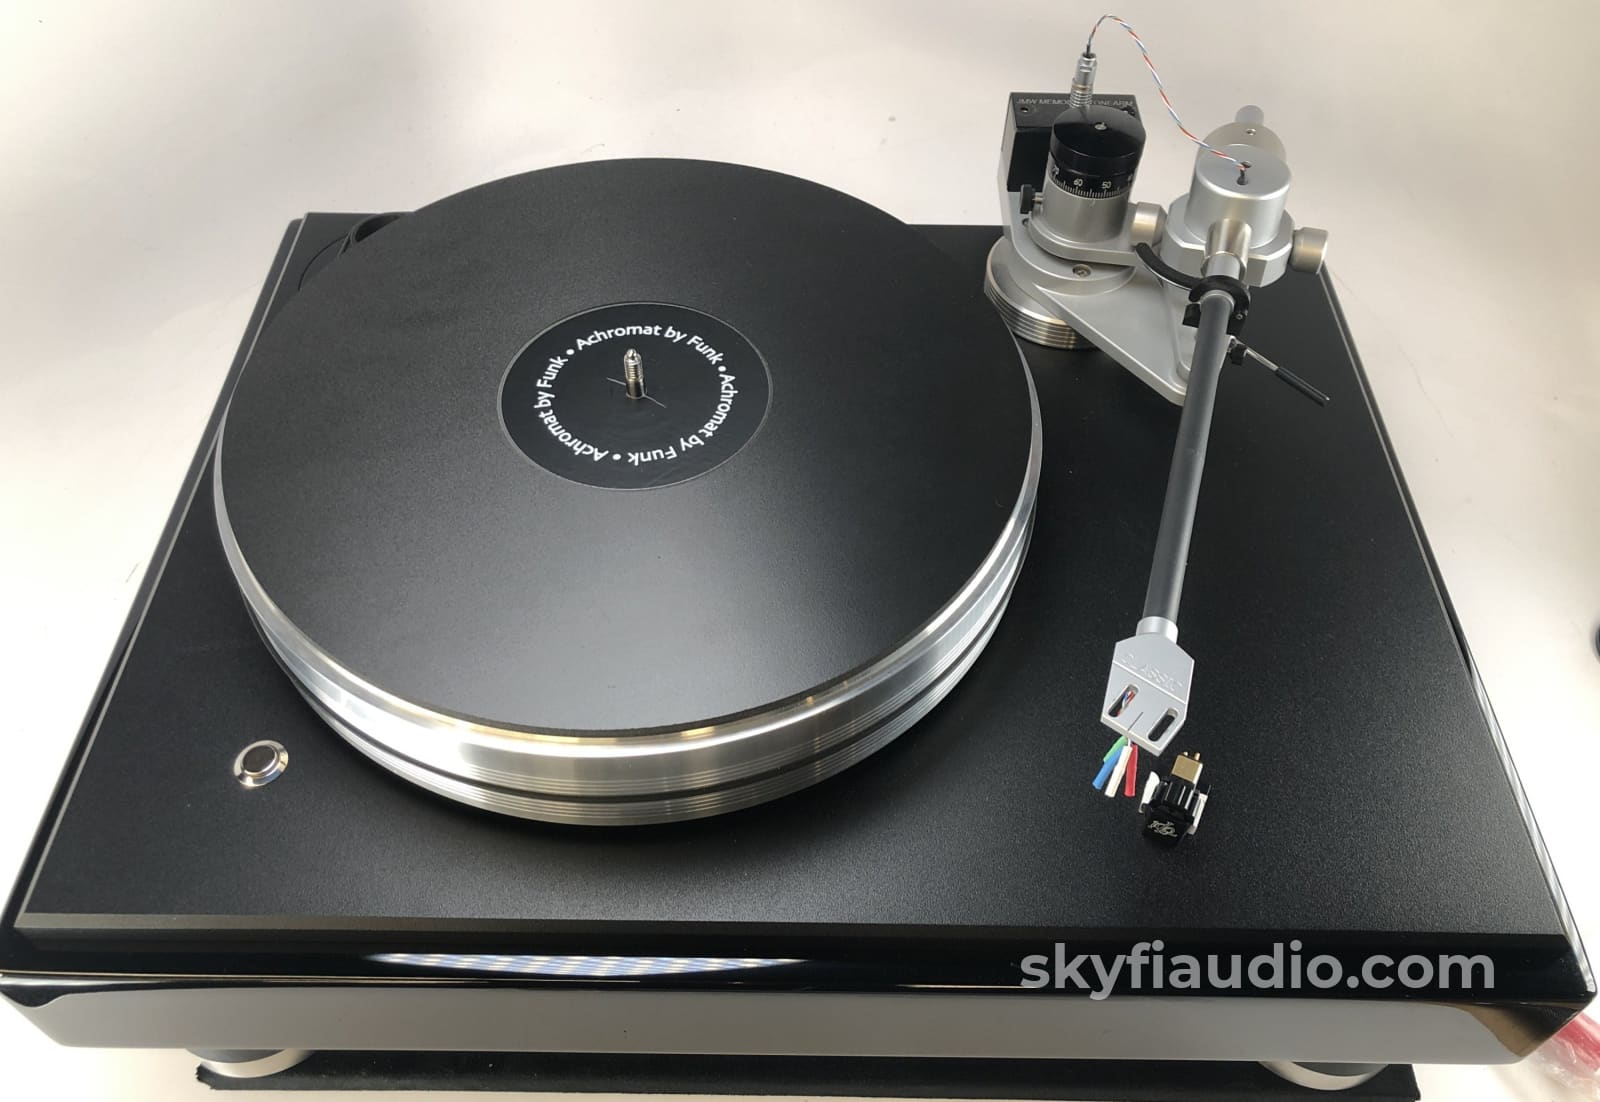 Vpi Classic 3 Turntable - With Jwm Memorial Arm And New Vpi/Grado Gold Cartridge